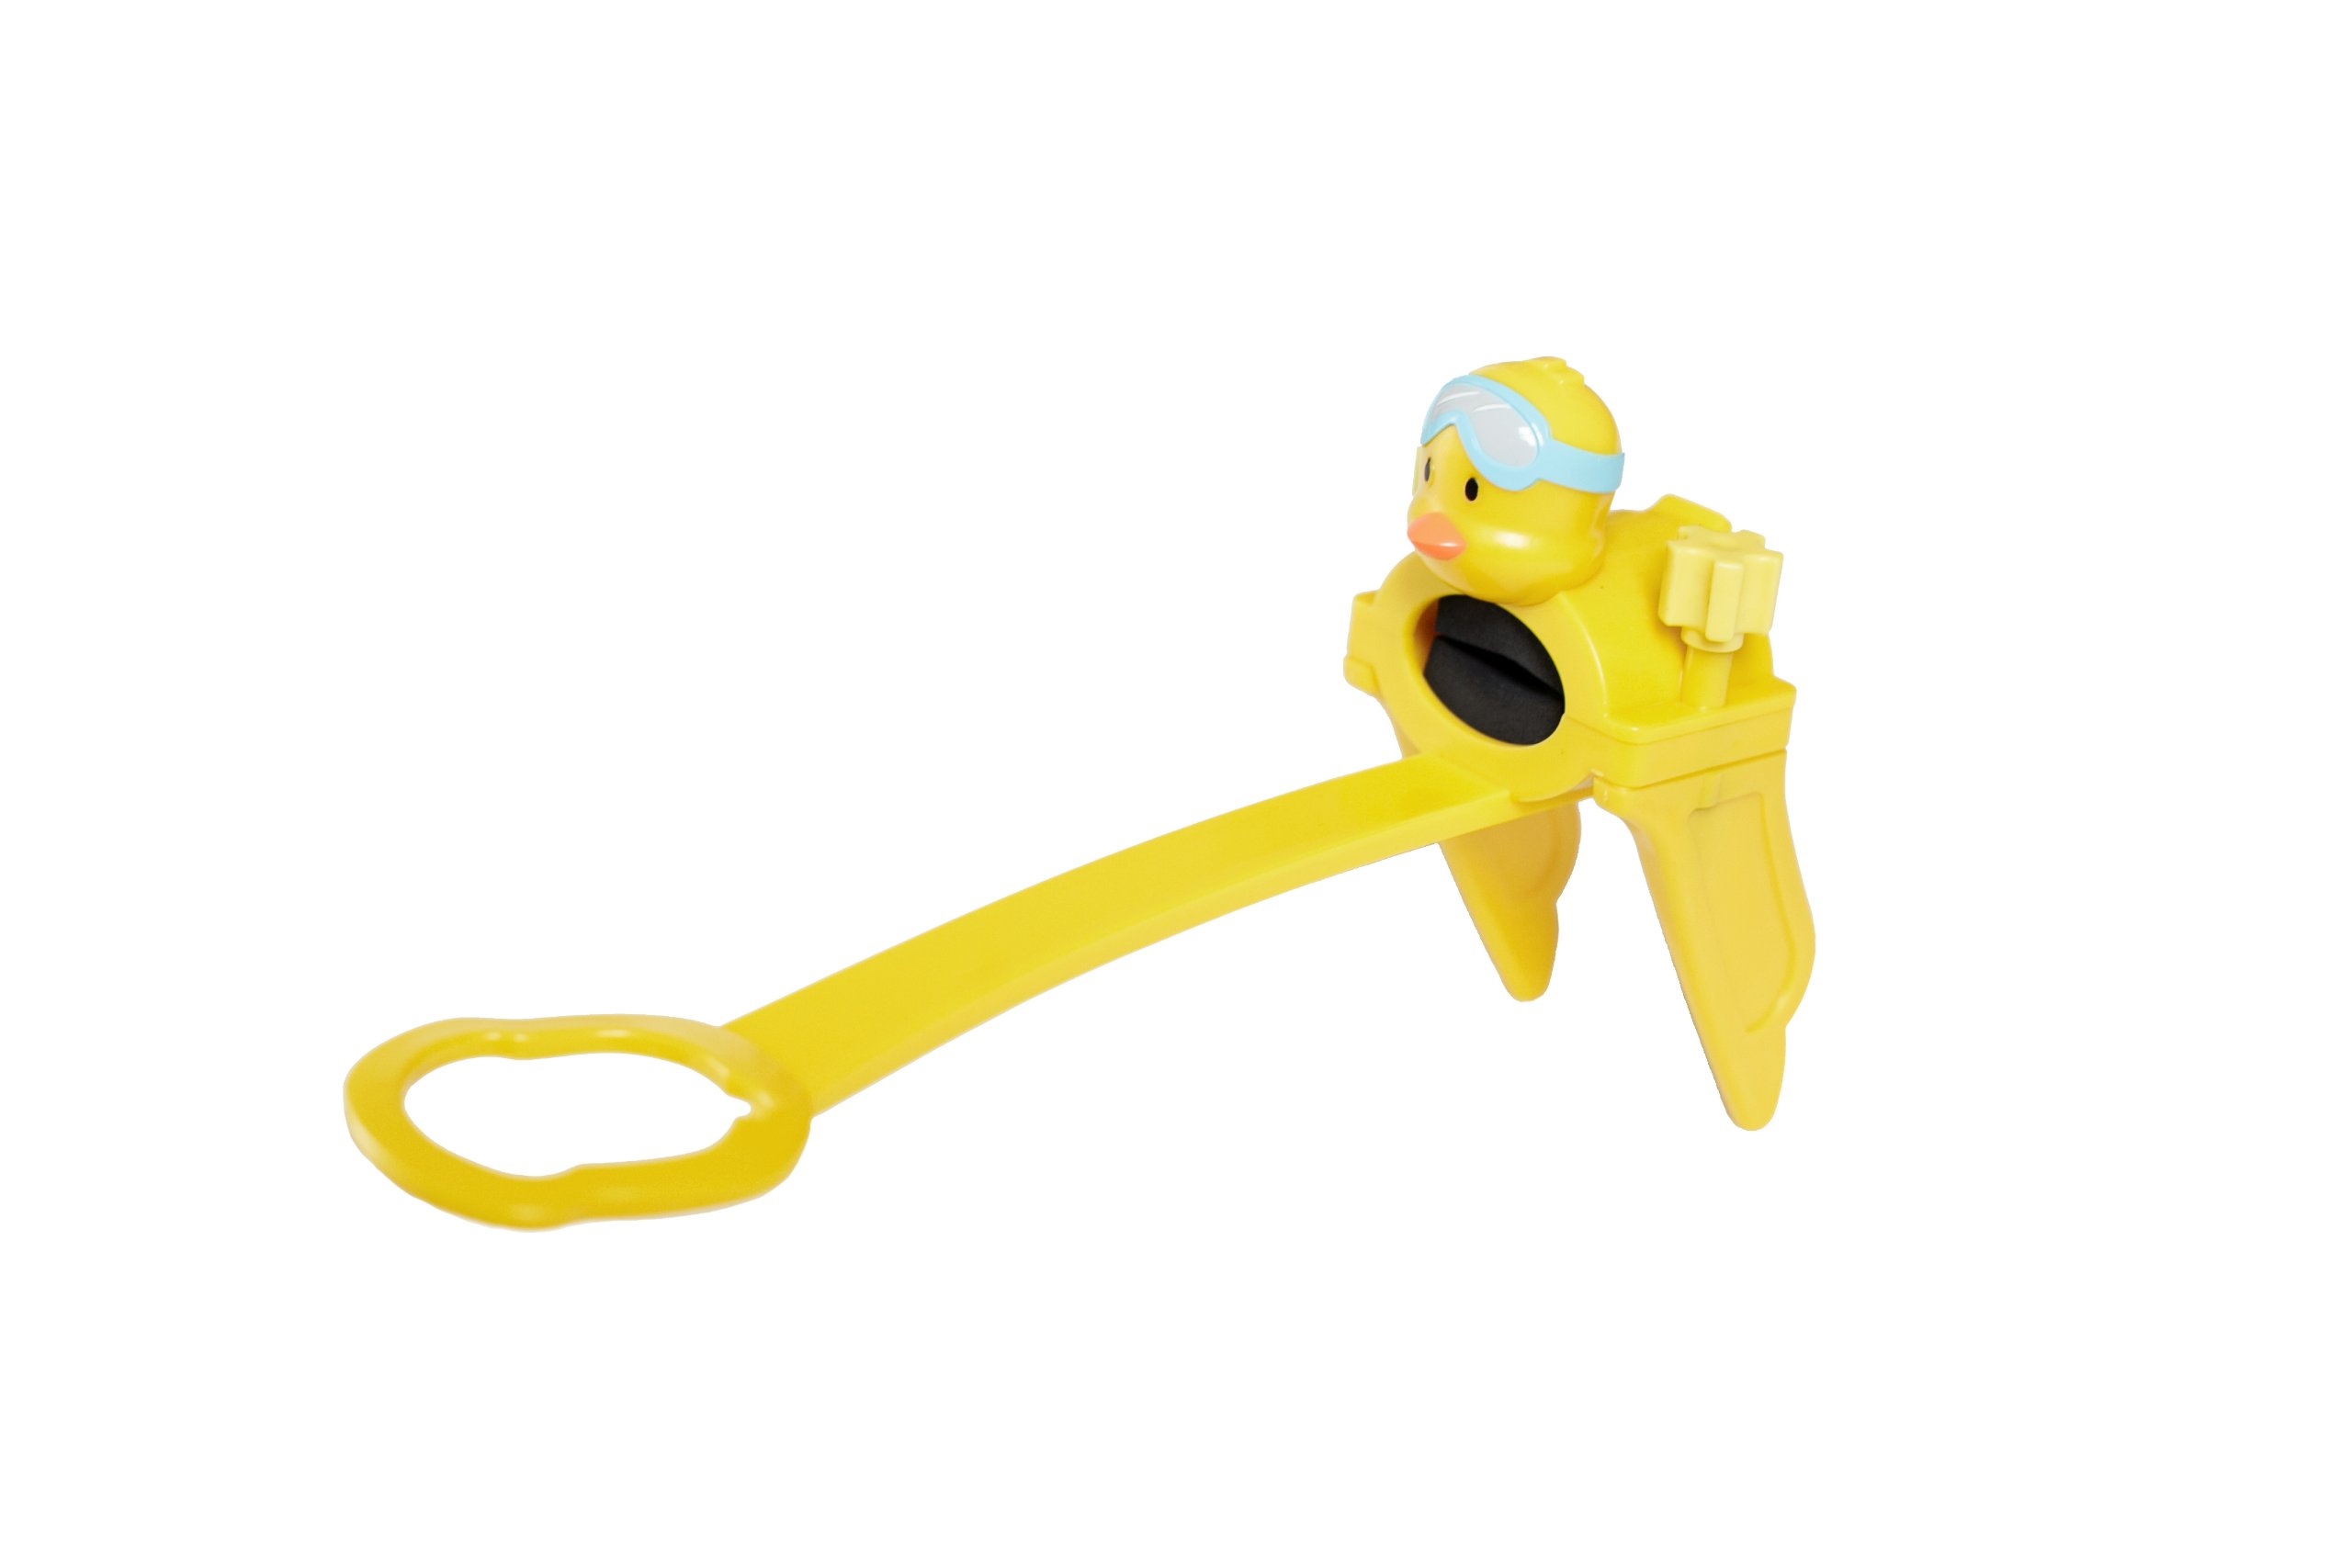 Aqueduck Faucet Handle Extender. A Safe Fun, Kid Friendly Hand Washing Solution. Connects to Sink to Make Washing Hands Fun and Teaches your Baby or Child Good Habits (Single Handle Faucets. Yellow)